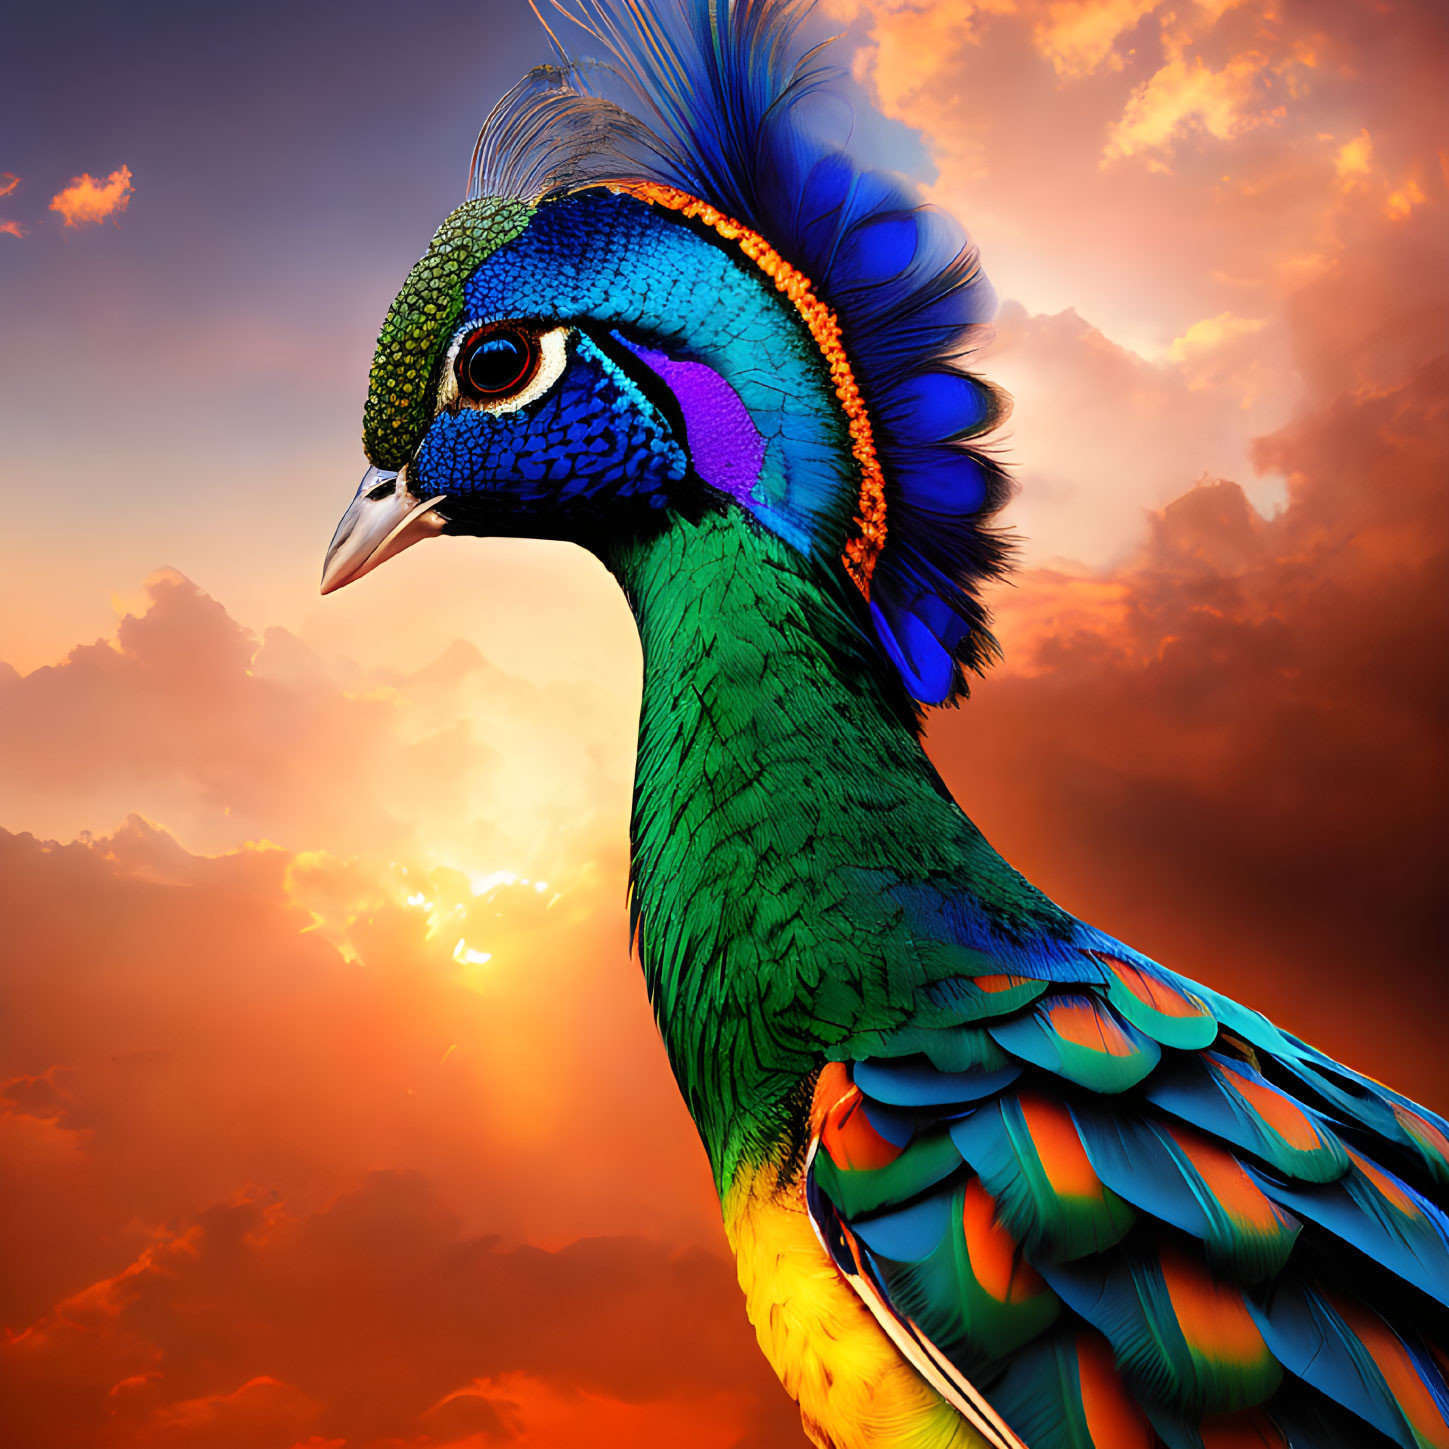 Colorful Peacock with Blue and Green Feathers in Orange Sunset Sky